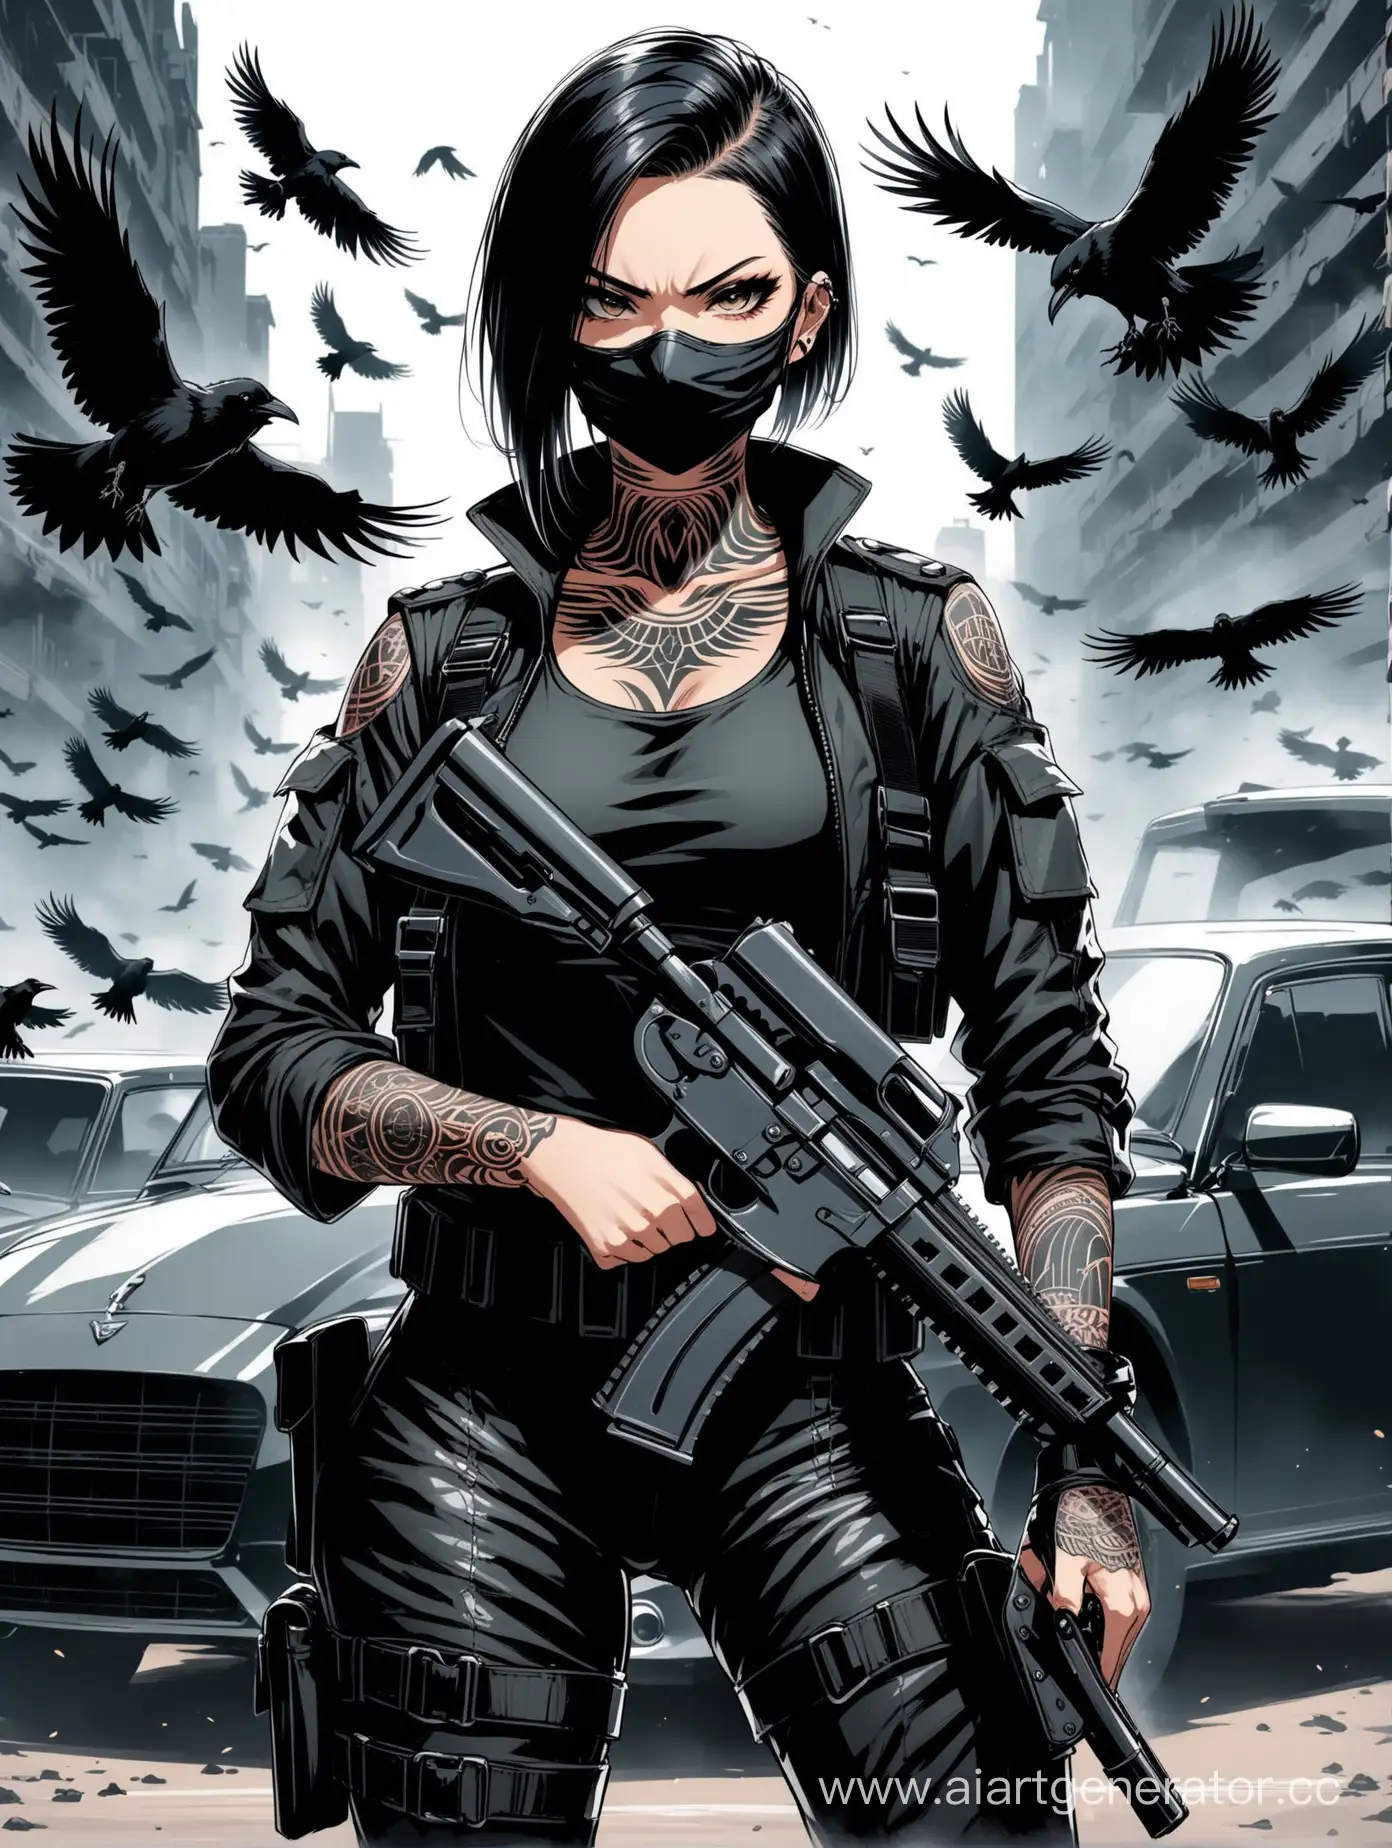 Edgy-Tattooed-Girl-with-Double-Holster-and-Military-Attire-Amidst-Black-Crows